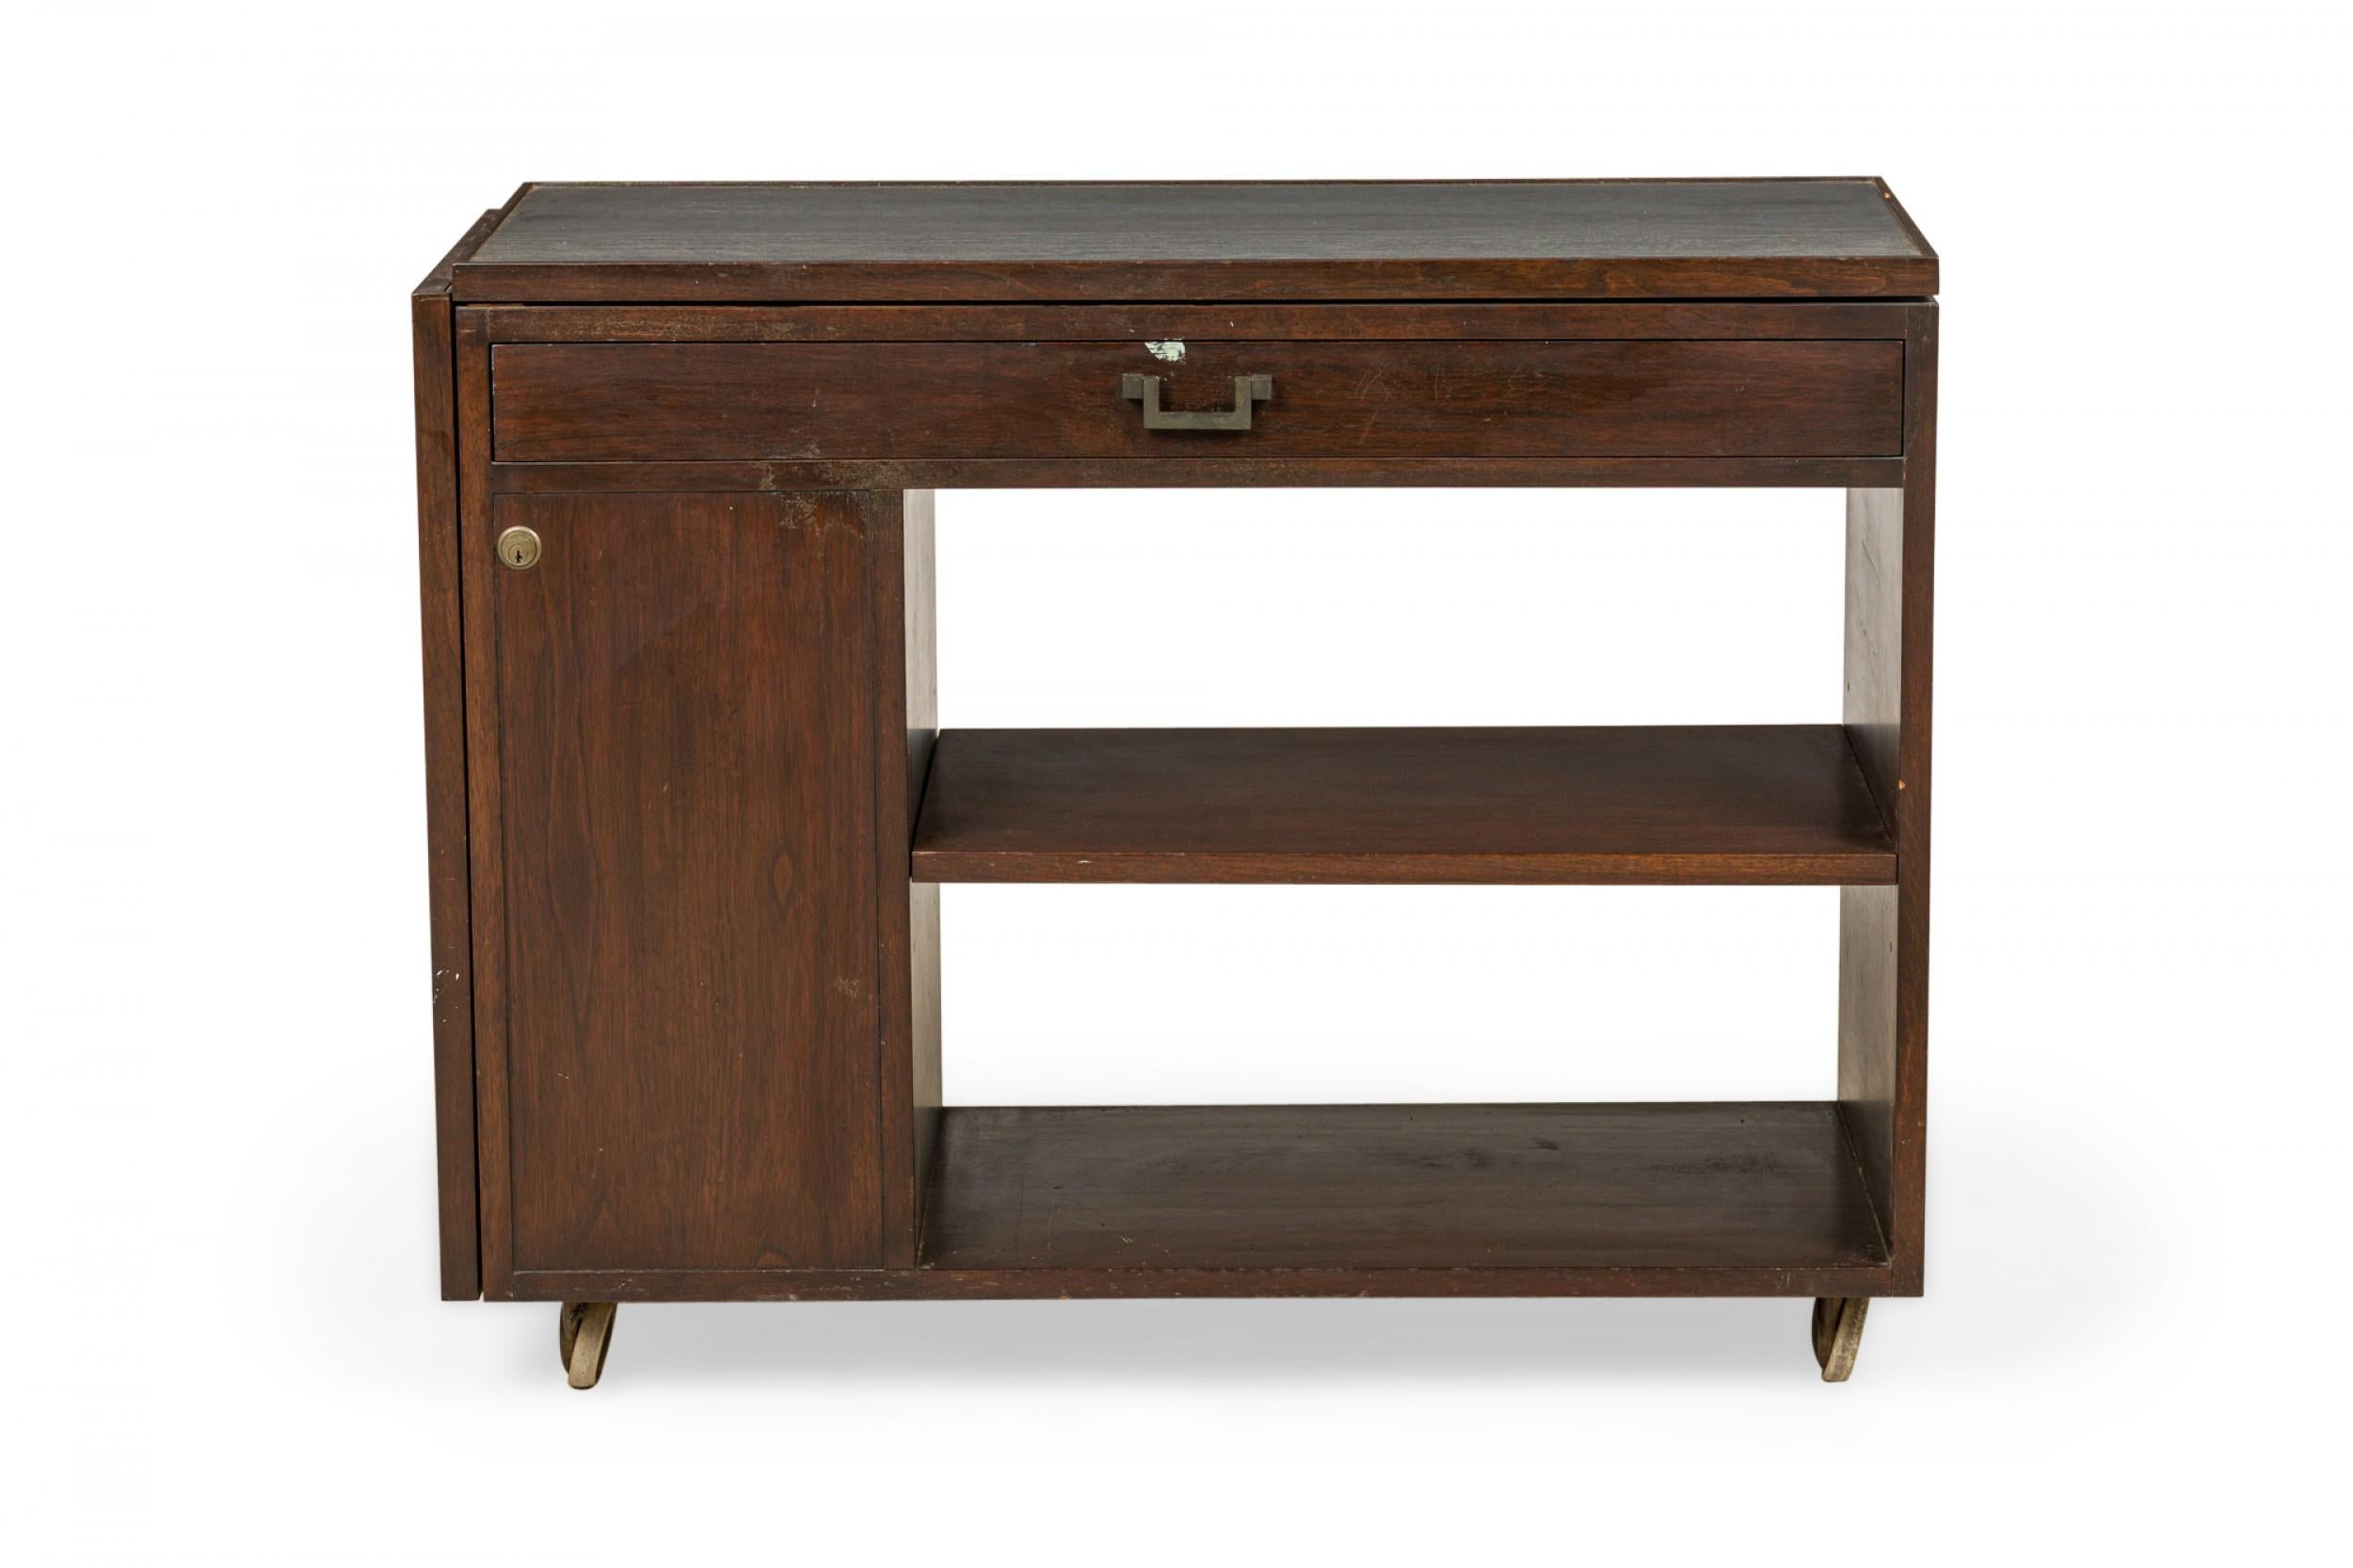 American Mid-Century rectangular serving trolley with a dark stained walnut frame, featuring a closed left side cabinet and two open shelves on the right below a drawer with bracket-shaped brass hardware, topped with an inset slate surface with a